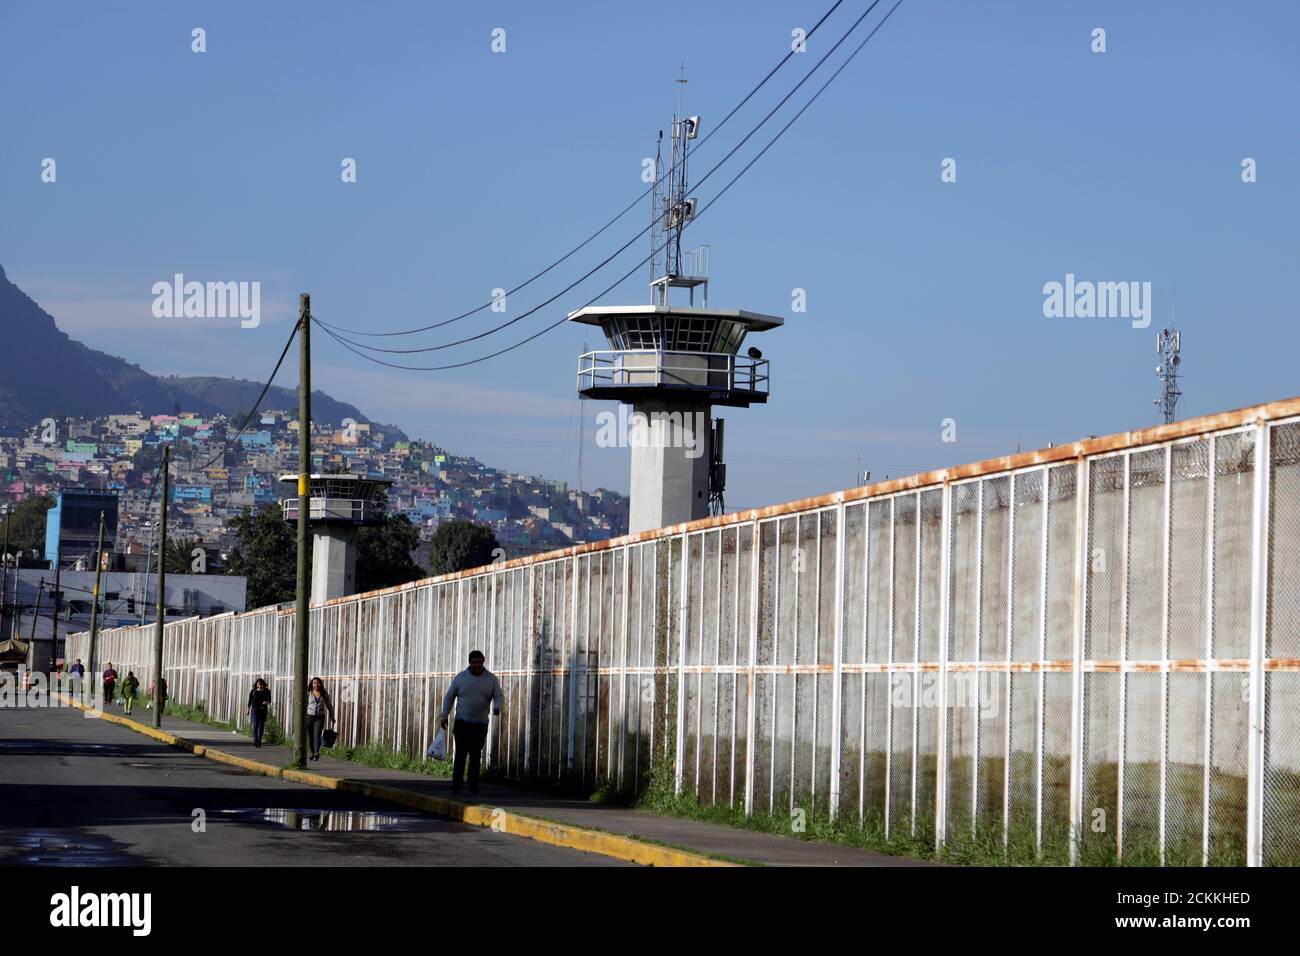 A general view shows the Santa Martha Acatitla prison, where former social development minister Rosario Robles was taken into custody pending criminal proceedings in a case involving loss to taxpayers, in Mexico City, Mexico August 13, 2019. REUTERS/Luis Cortes Stock Photo